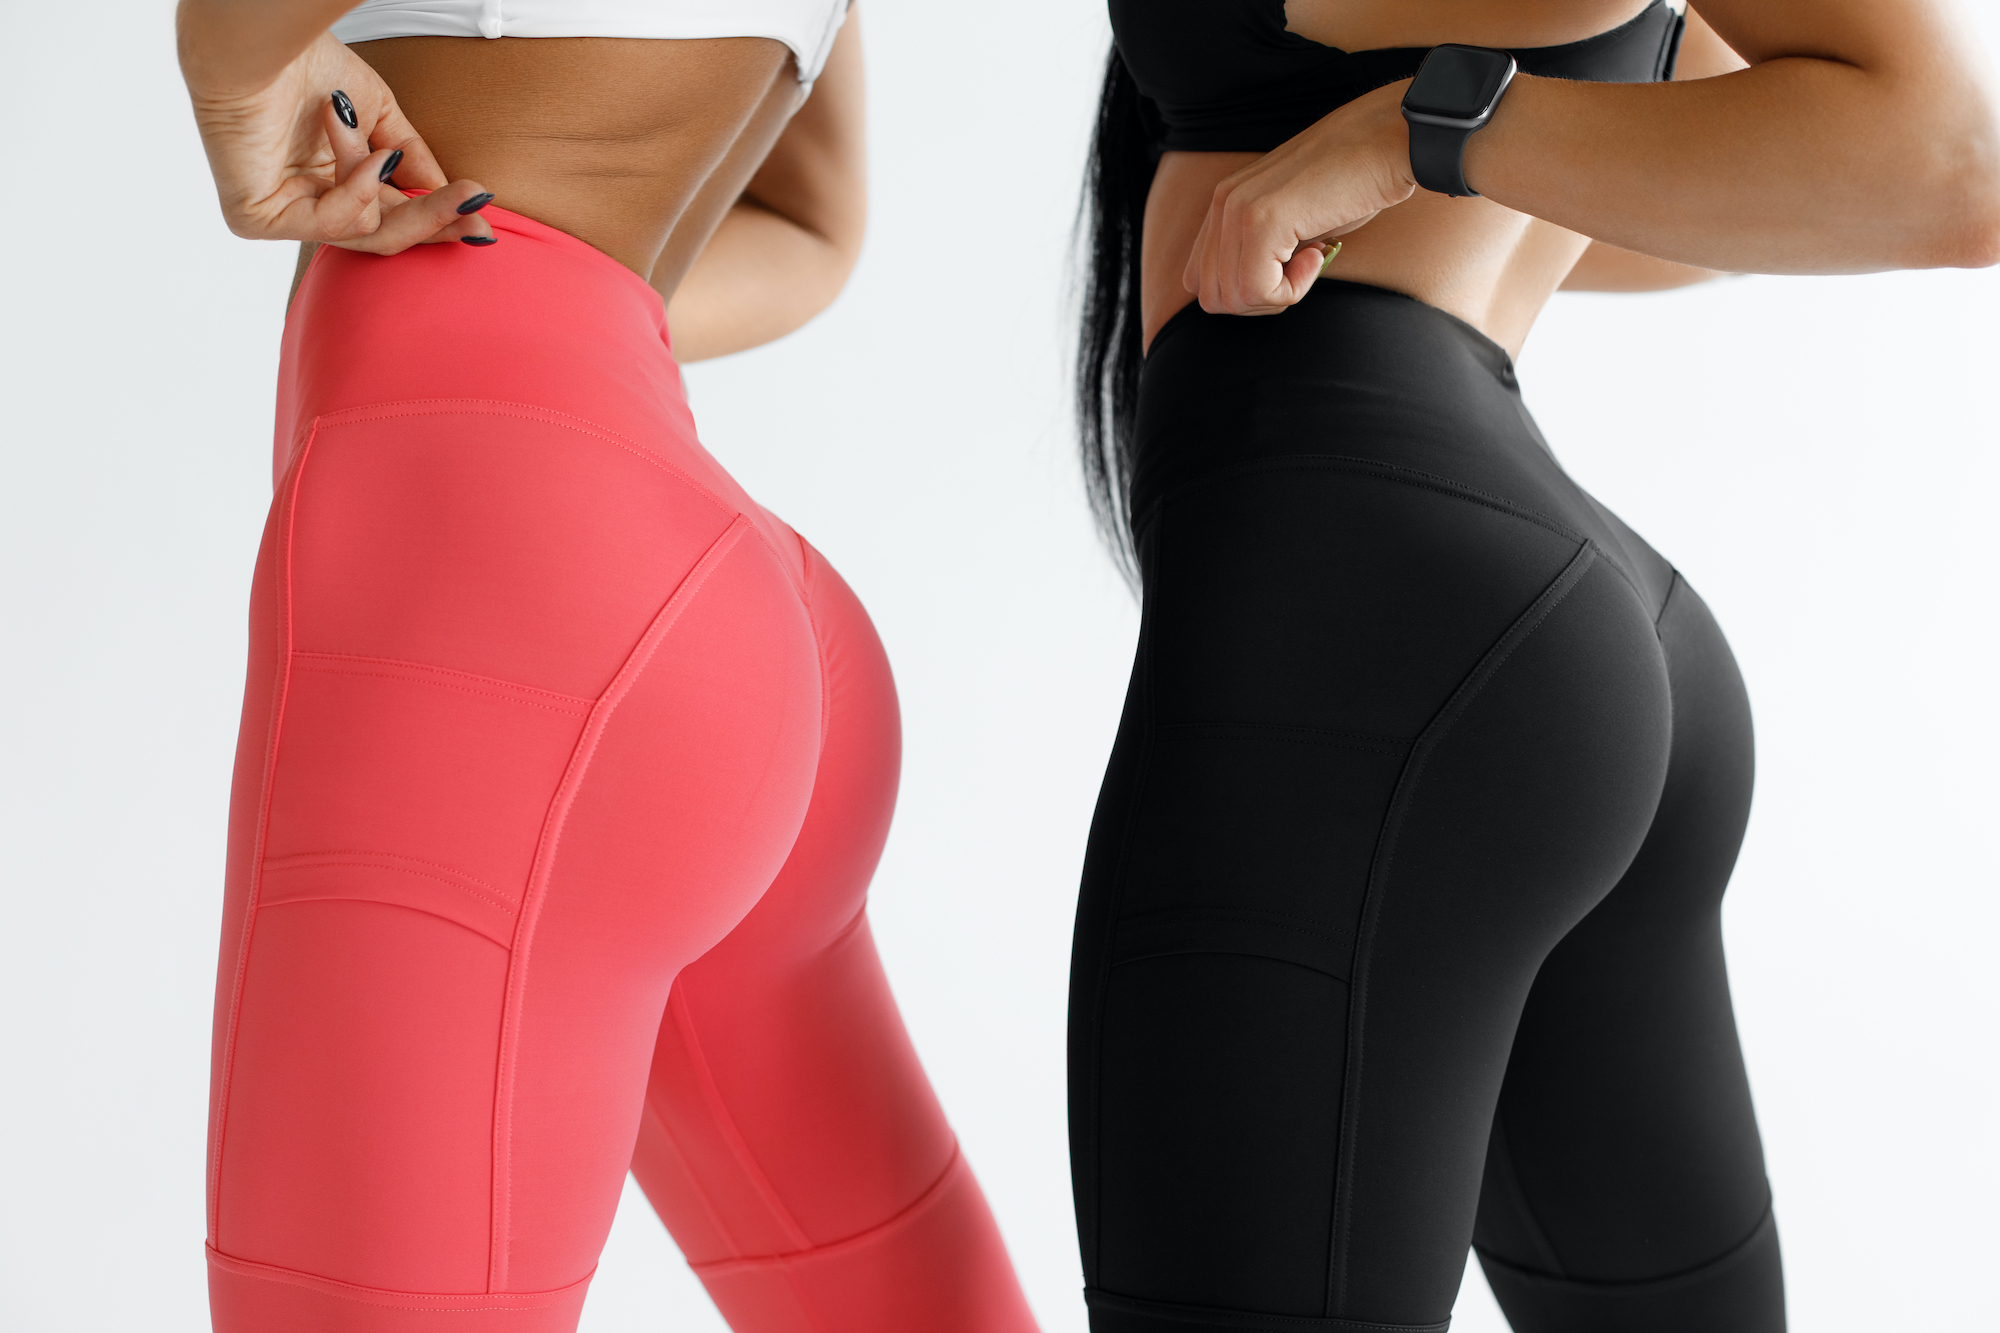 Nipali Sexy Girl Yoga - Seasum Booty Lifting Leggings Are a Hit With Over 54,000 Shoppers